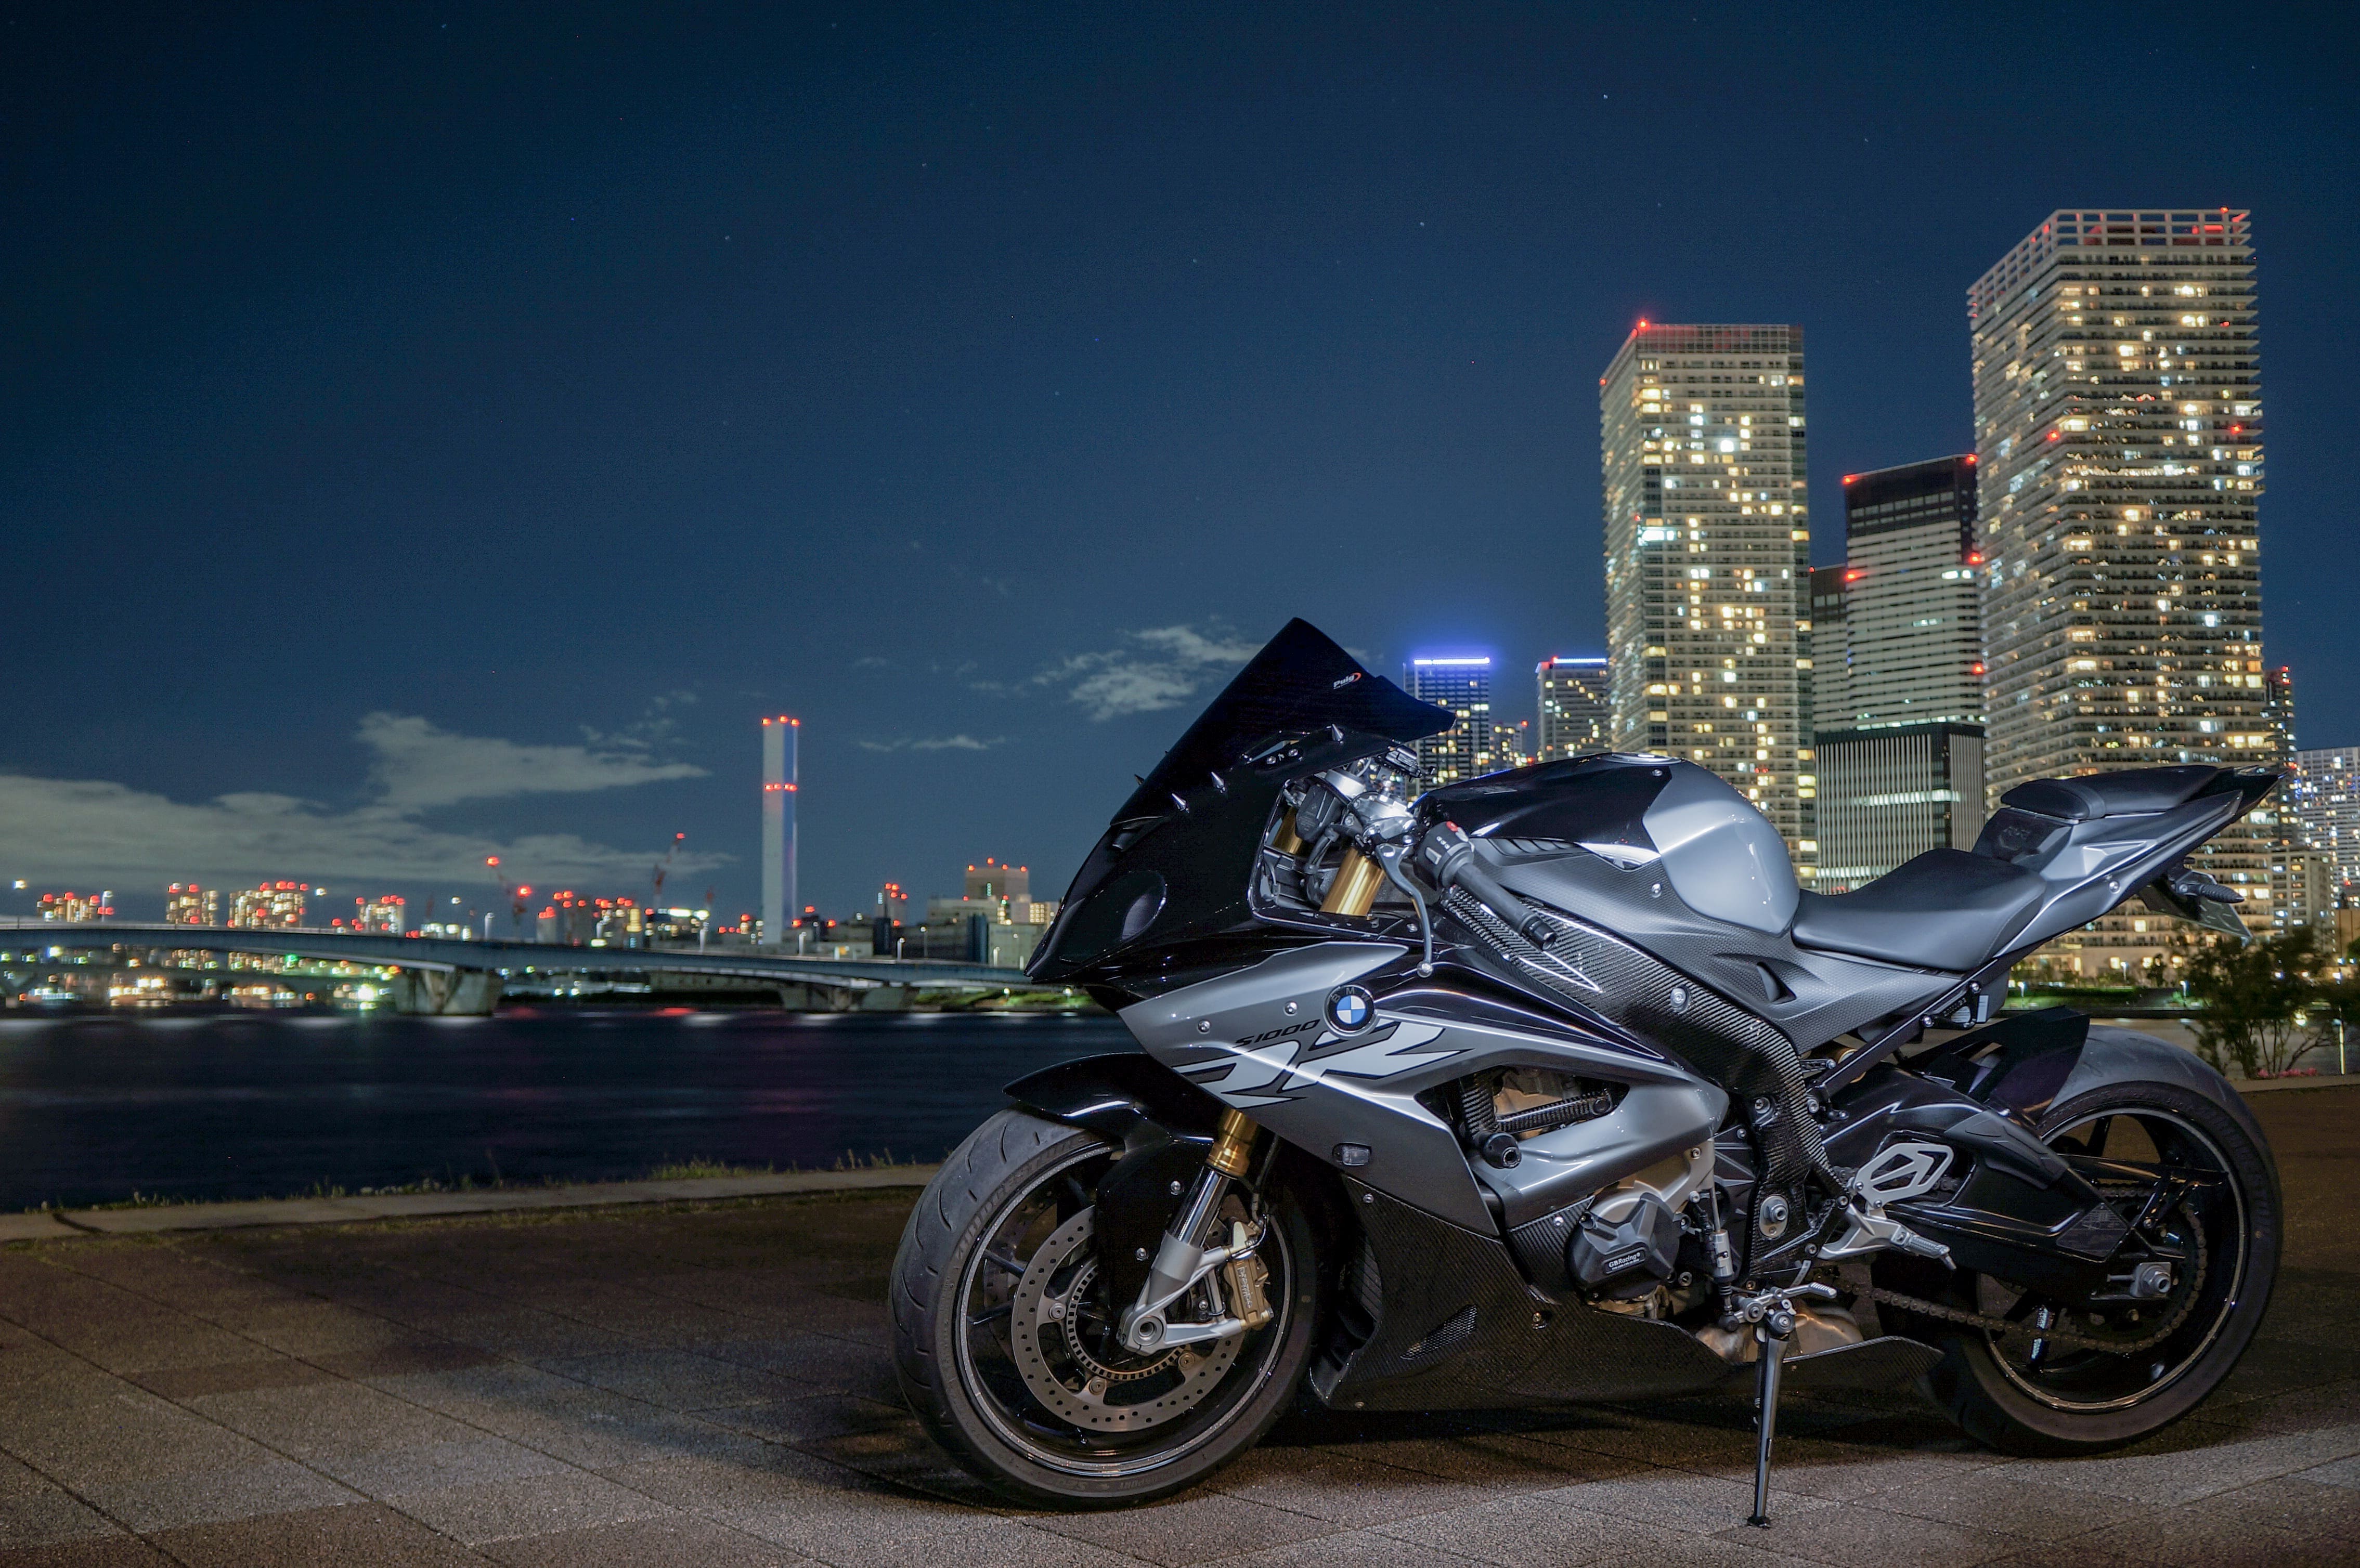 Wallpapers motorcycles BMW Bmw S1000rr on the desktop